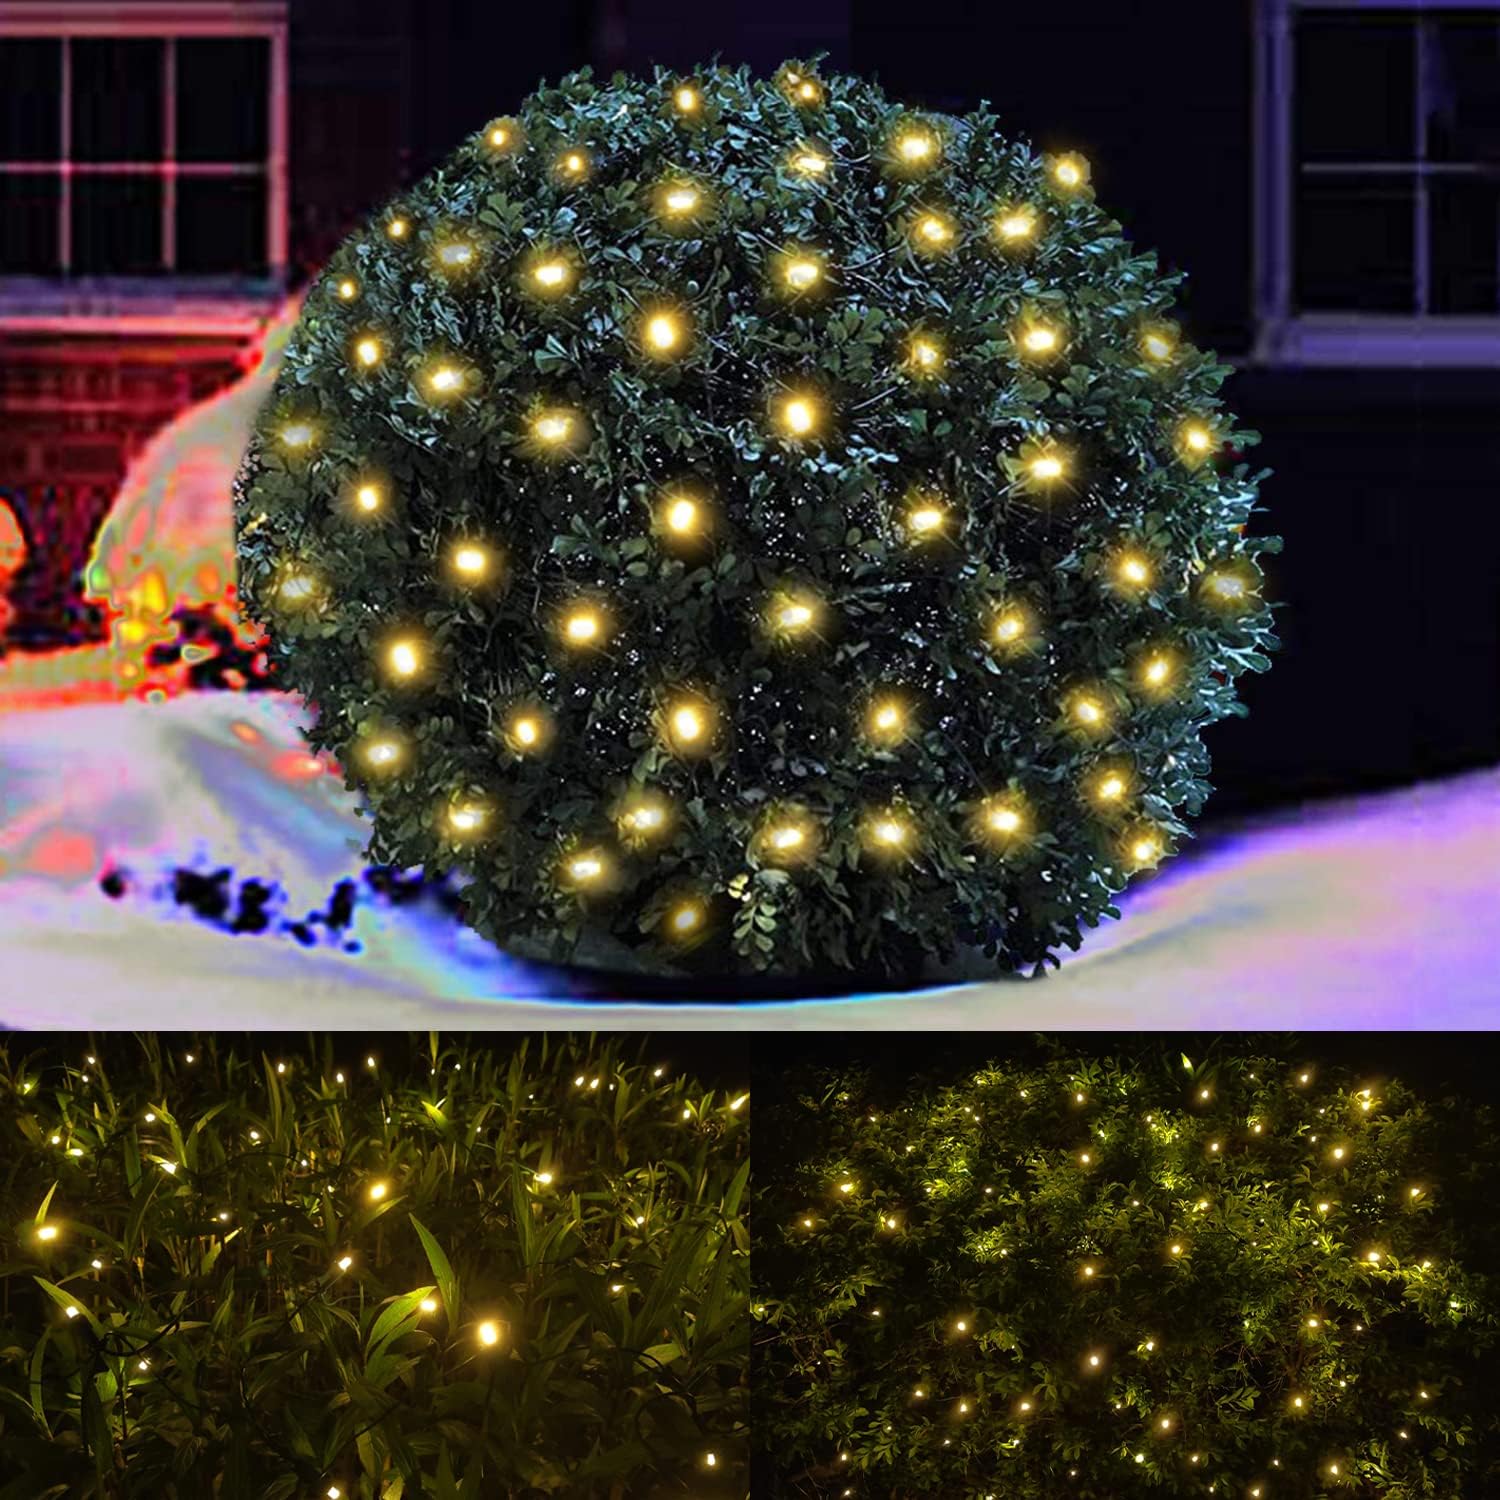 LED Christmas Net Lights Outdoor Christmas Decorations for Bushes, Warm White 100 LED 5FT x 5FT Connectable Green Wire Net Christmas Lights